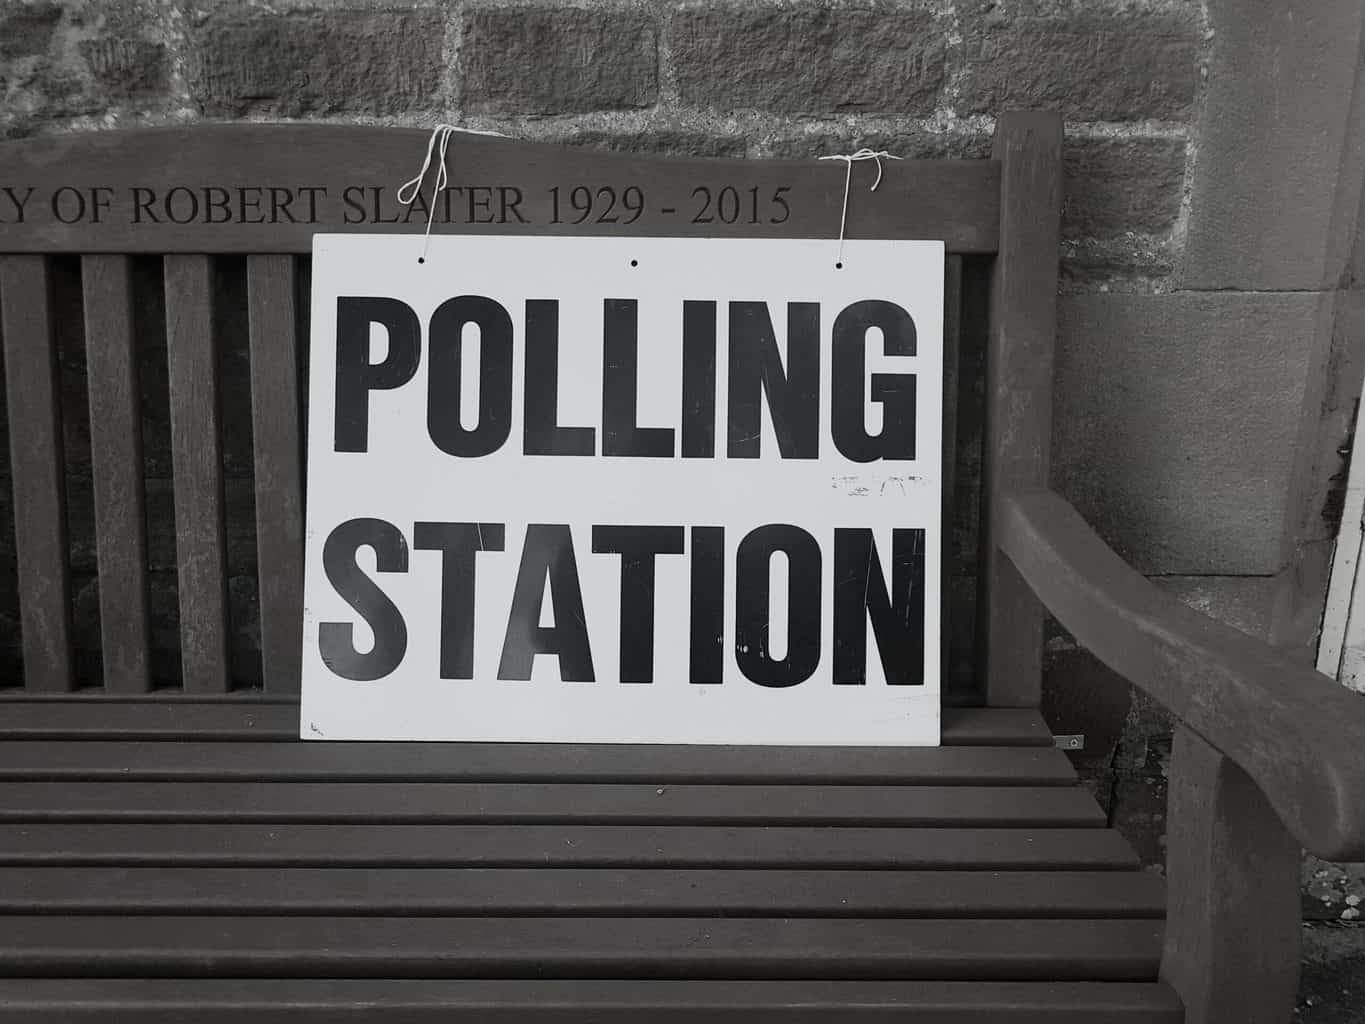 Polling Station sign in the UK